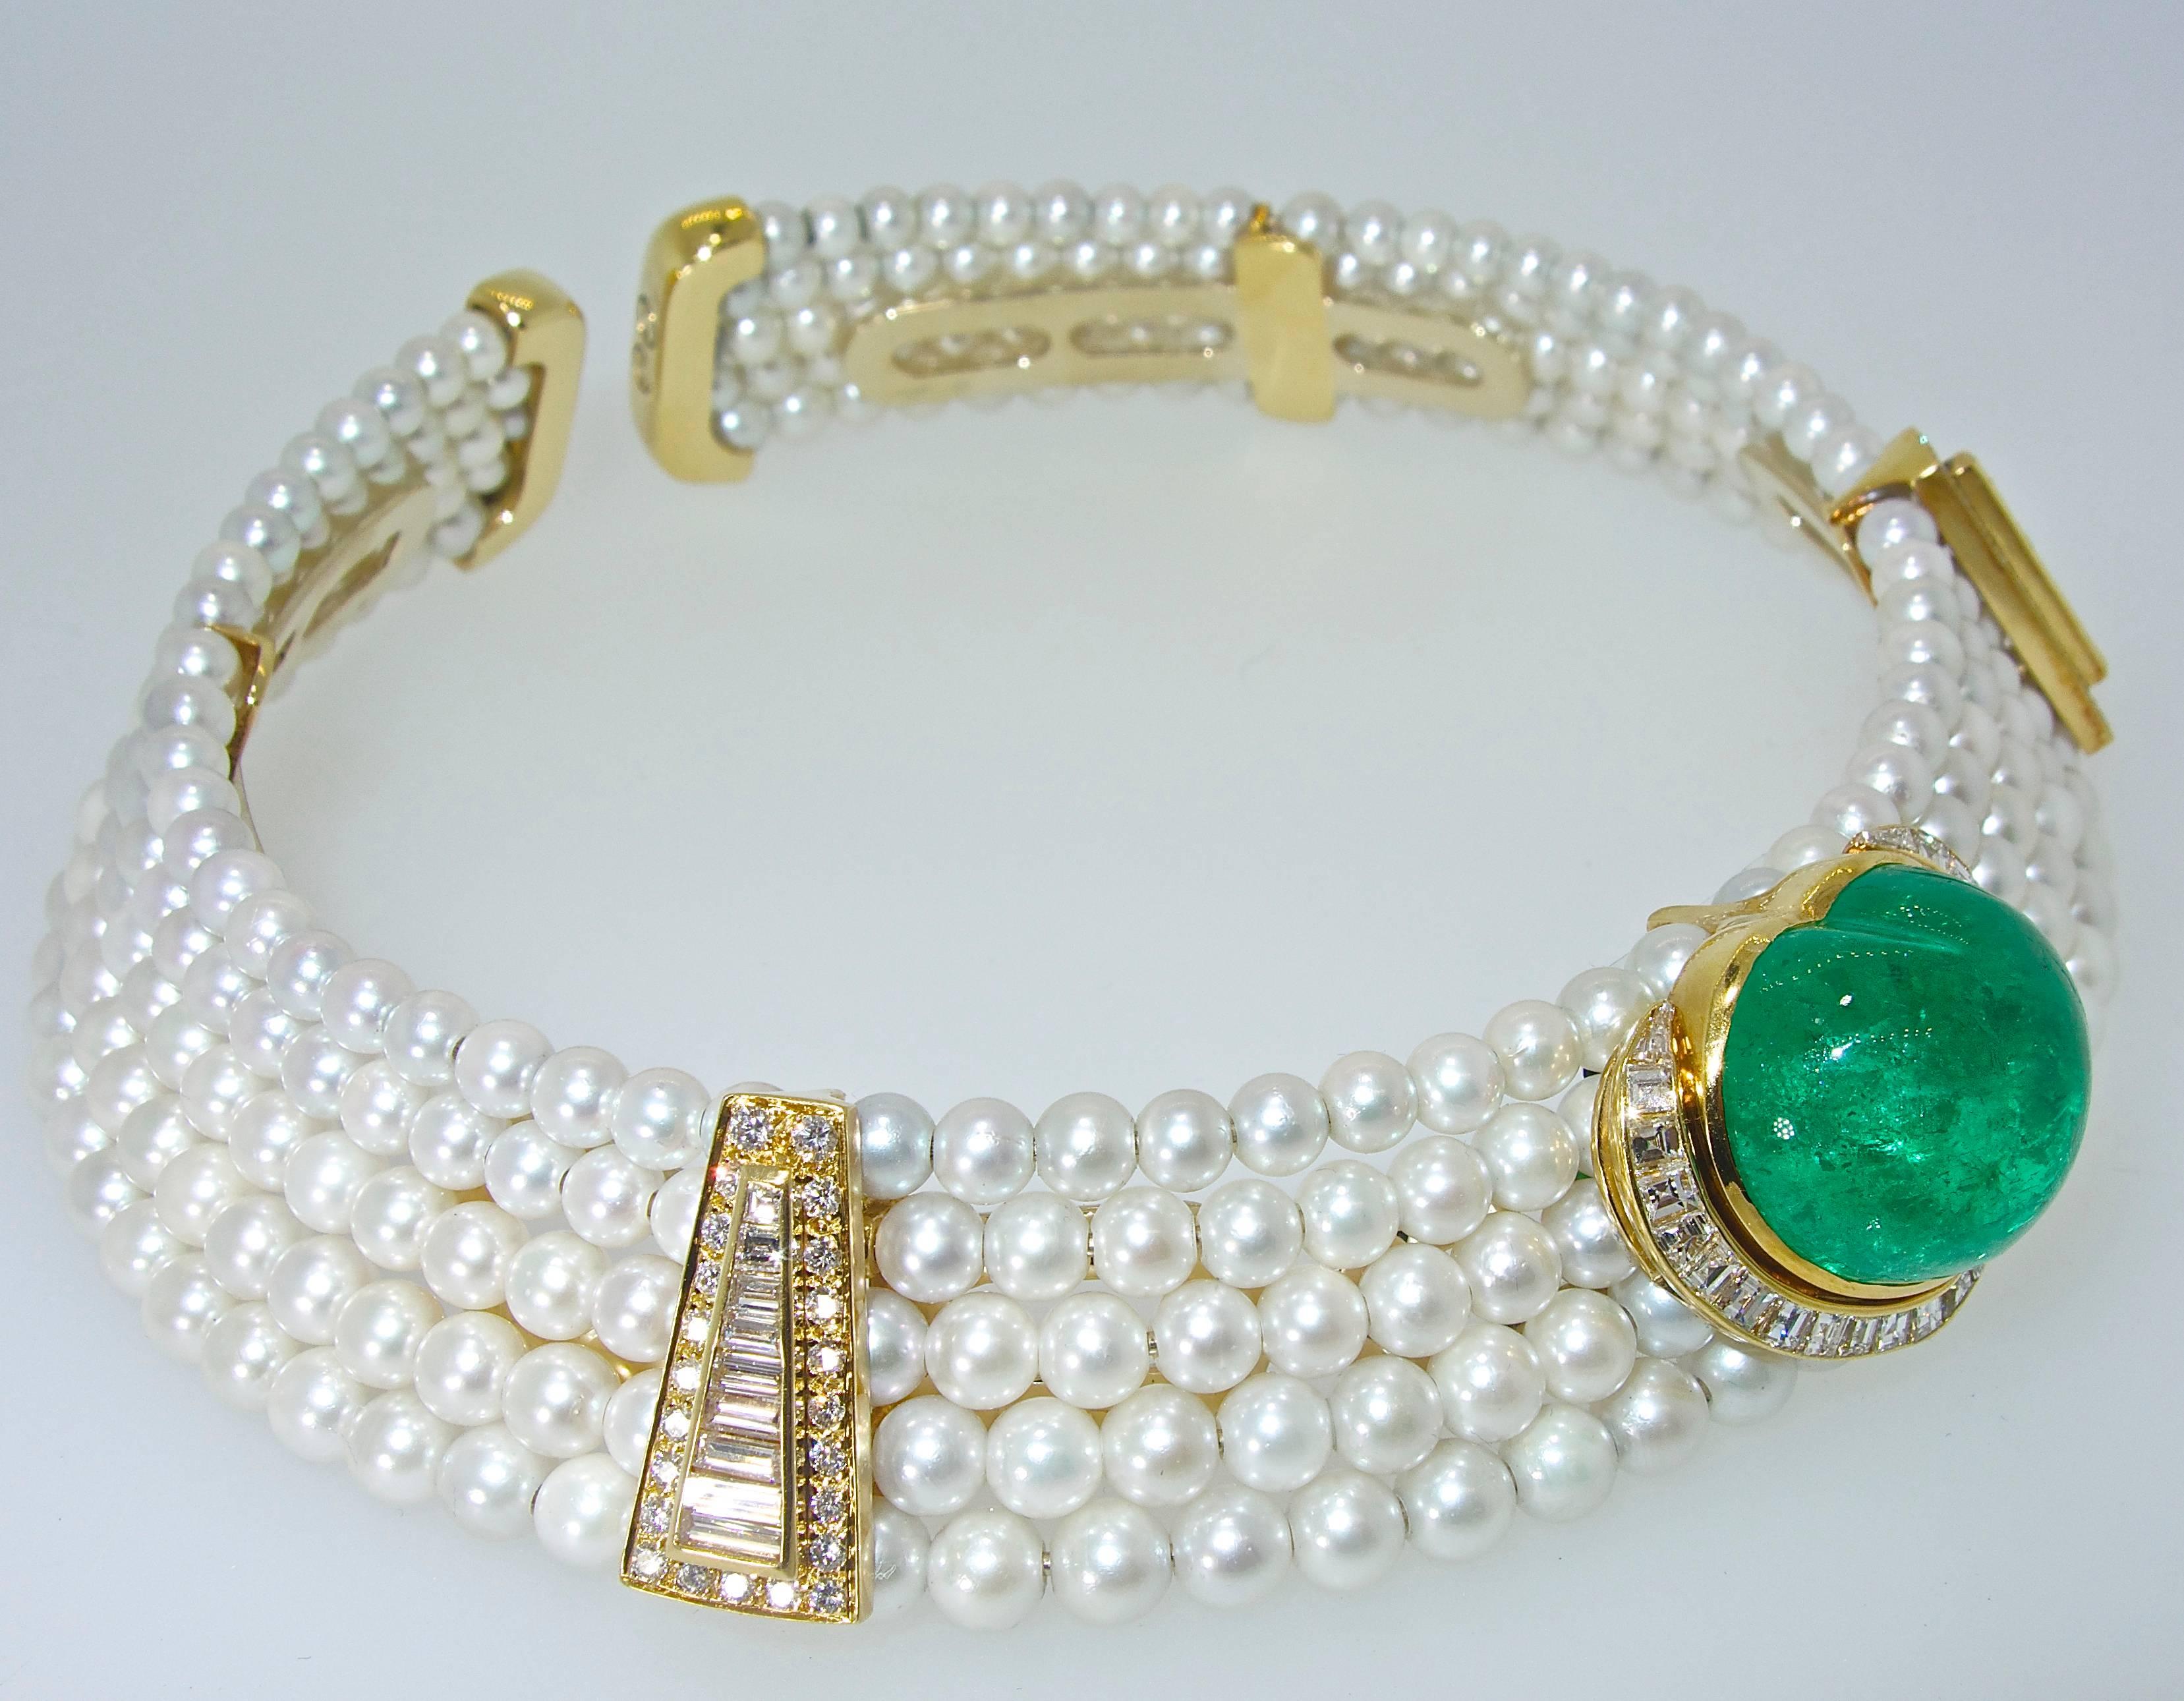 Women's or Men's Important Heart Shaped Emerald, Diamond and Pearl Choker Necklace